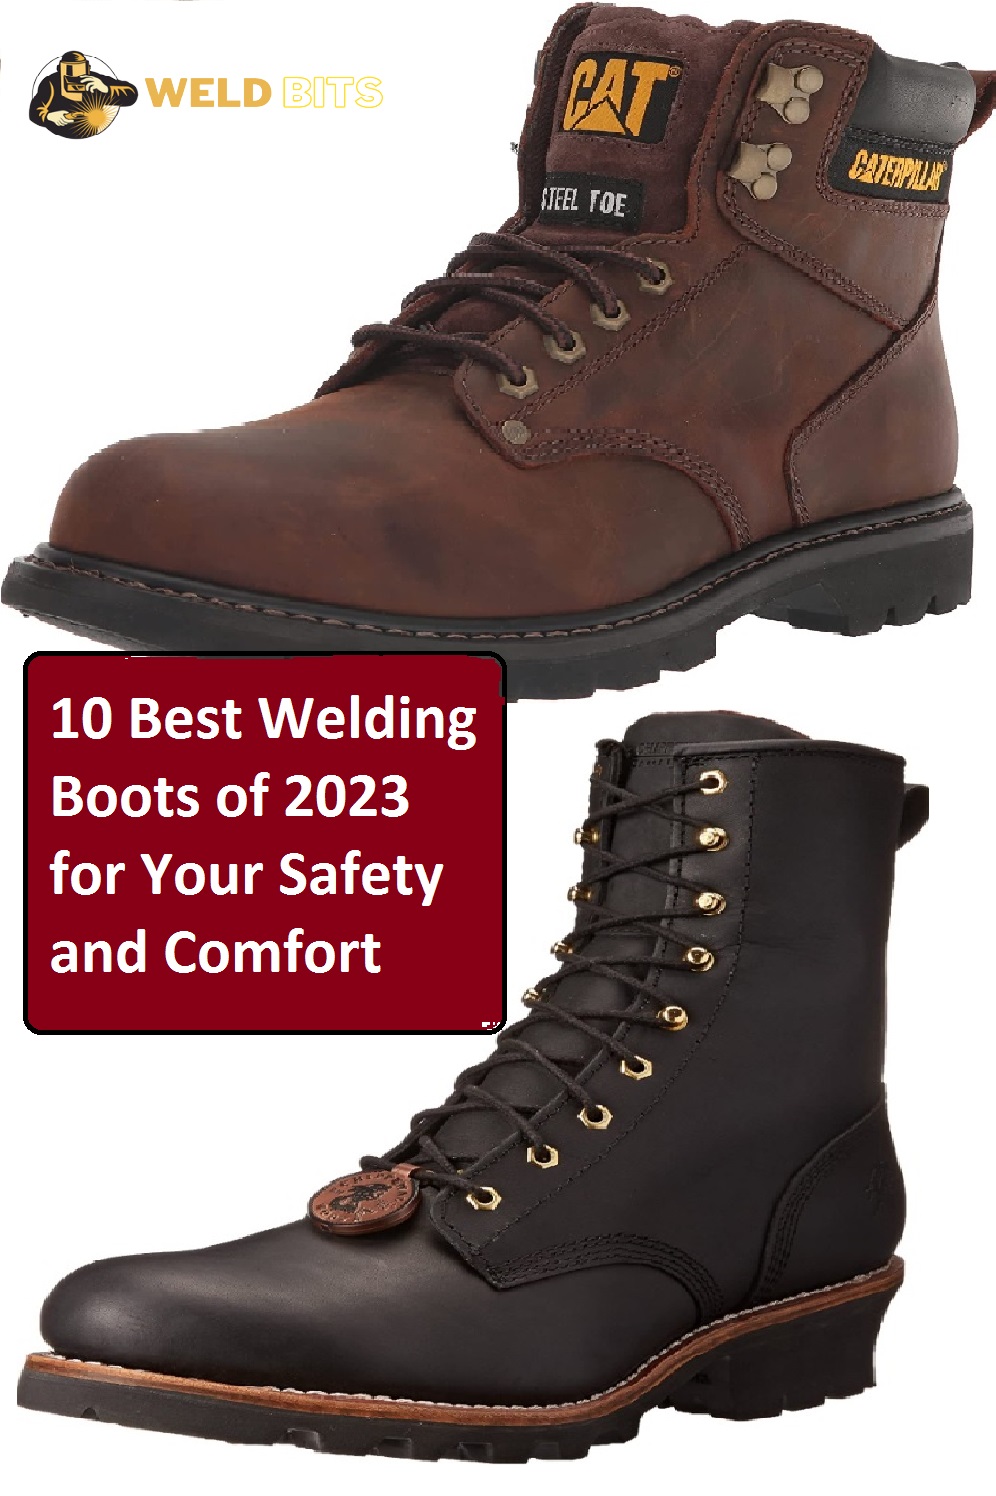 10 Best Welding Boots of 2023 for Your Safety and Comfort